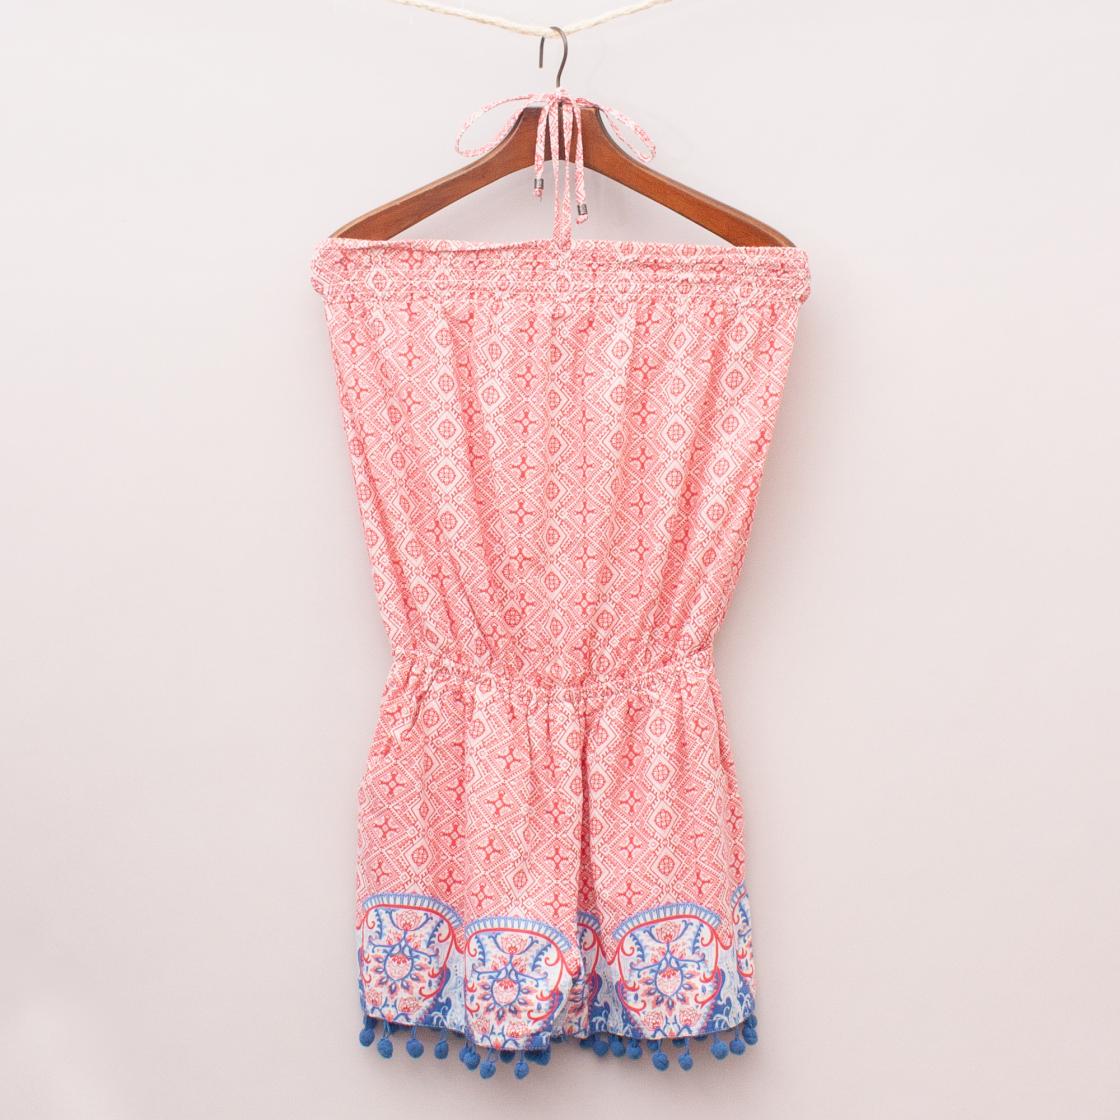 Gumboots Patterned Playsuit